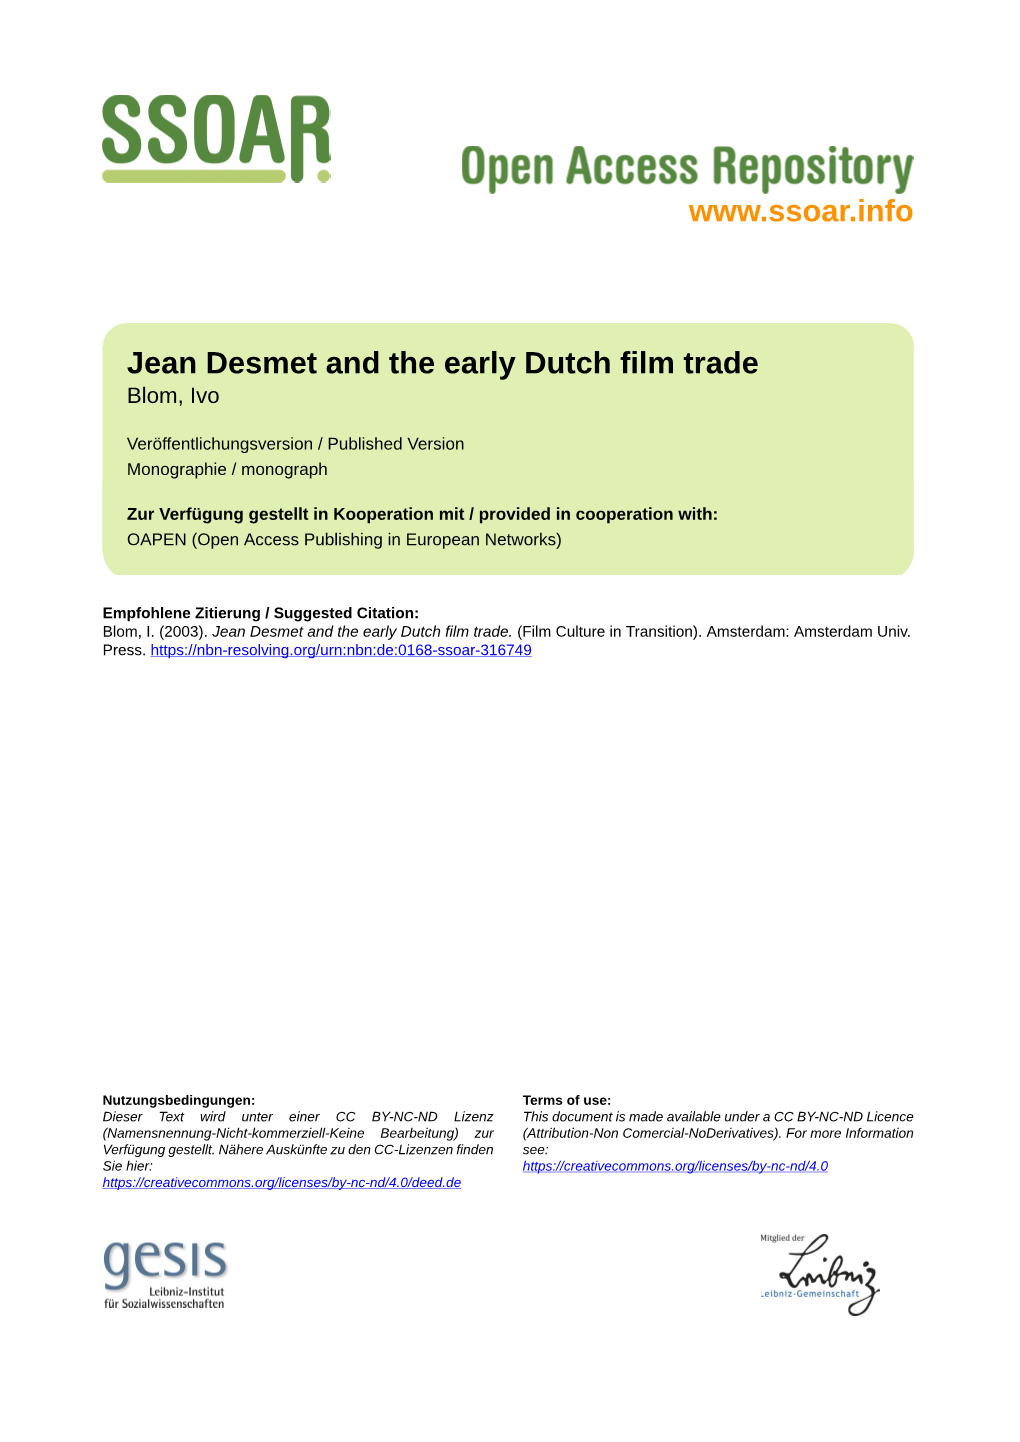 Jean Desmet and the Early Dutch Film Trade Blom, Ivo